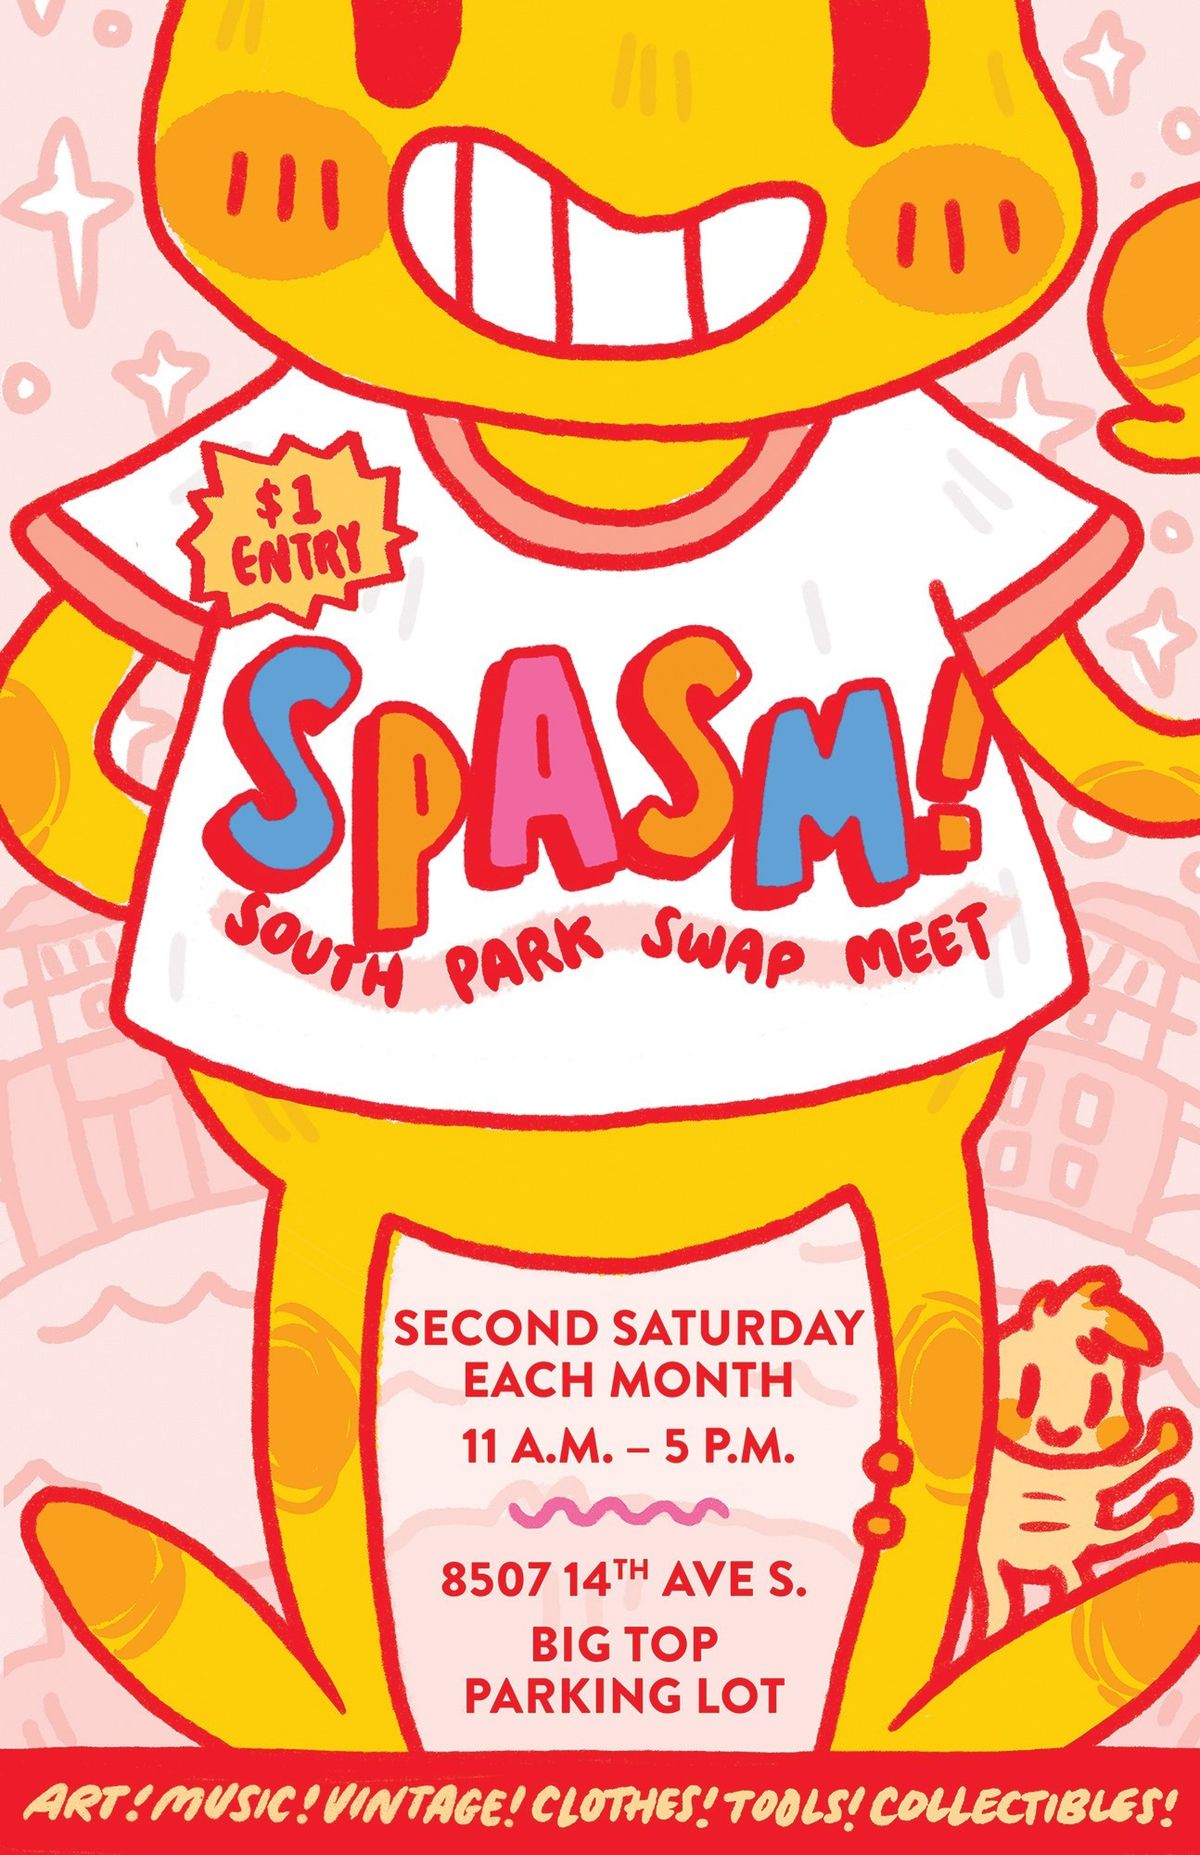 Spasm! The South Park Swap Meet! at Big Top Curiosity Shop in Seattle, WA -  Saturday, July 11, 2020 - EverOut Seattle